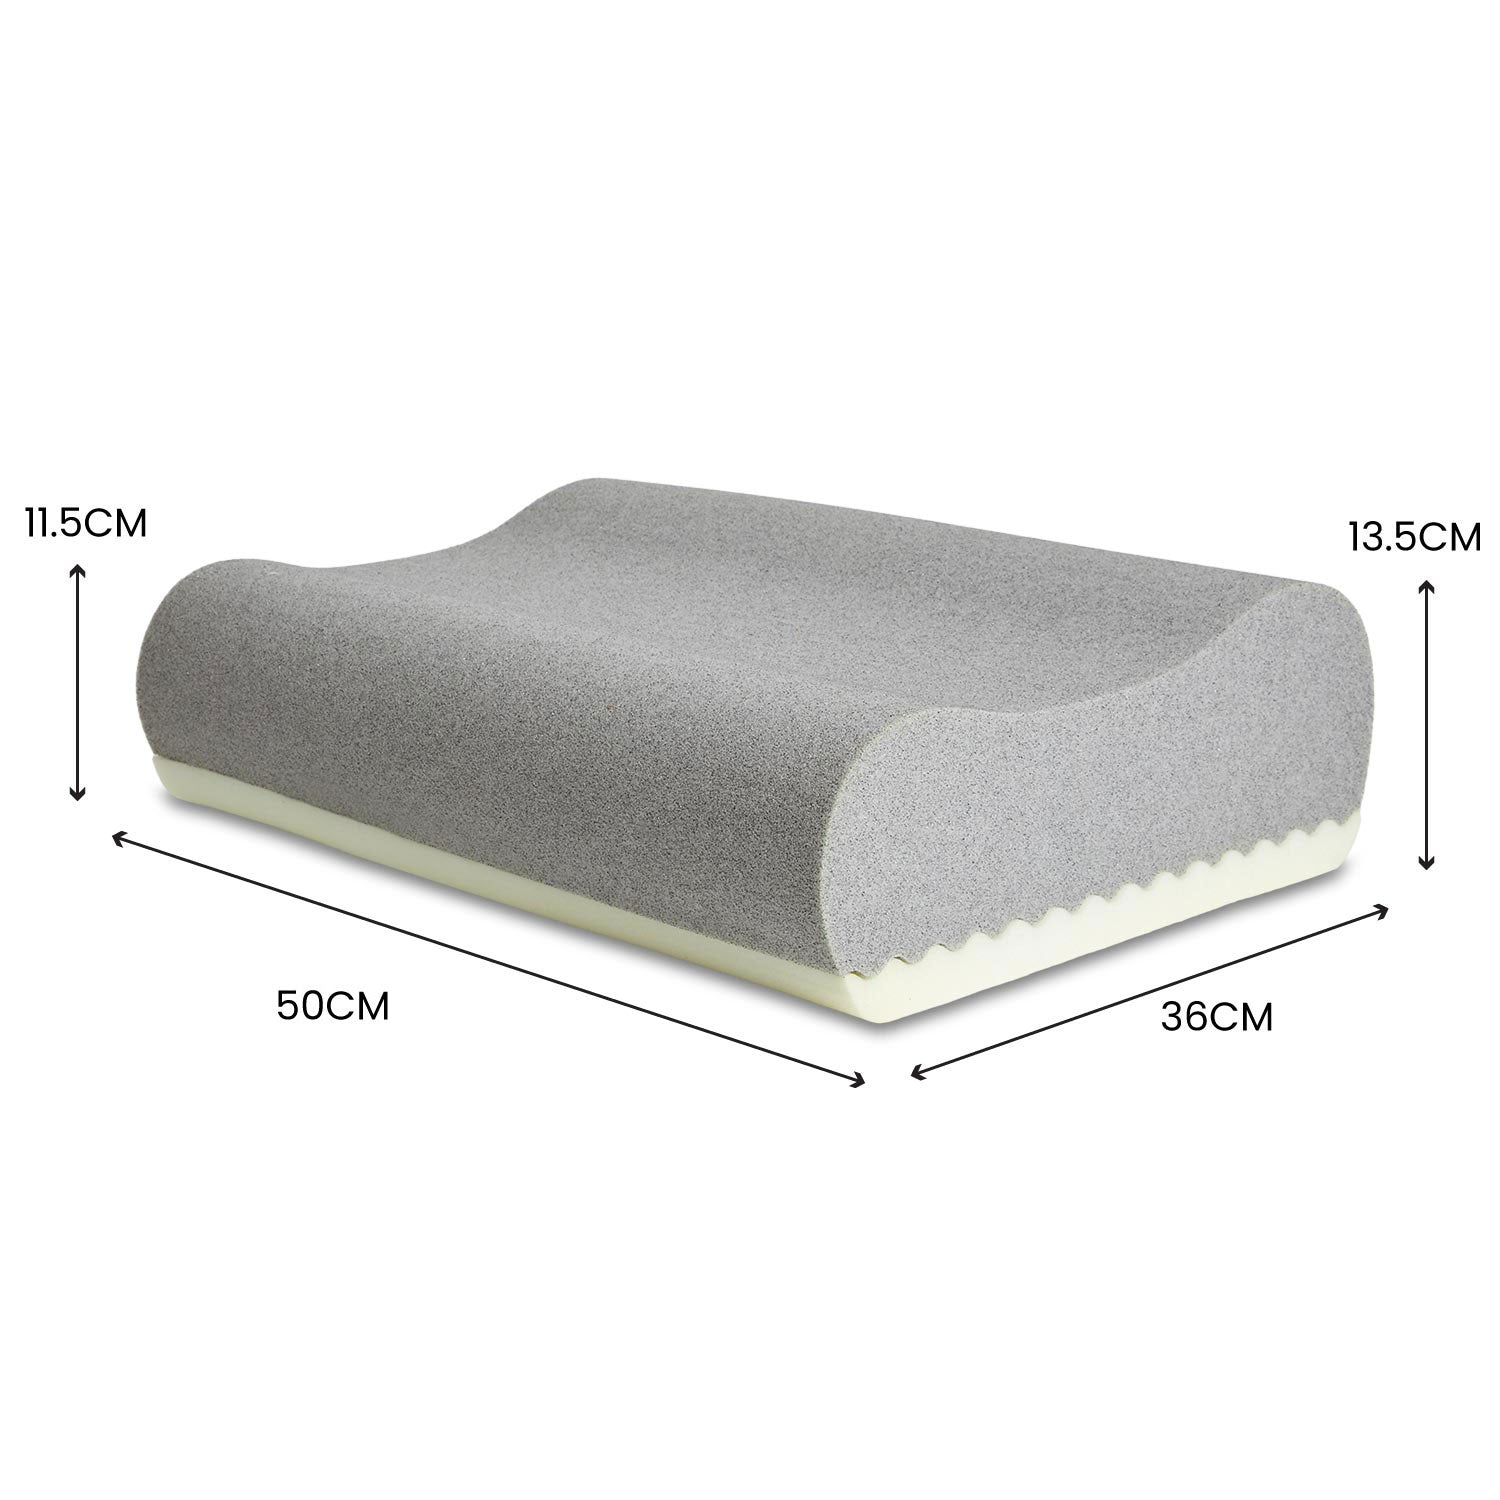 Somna Medica Graphite Infused Moderate Contour Adjustable Pillow - Mattress & Pillow SciencePillows